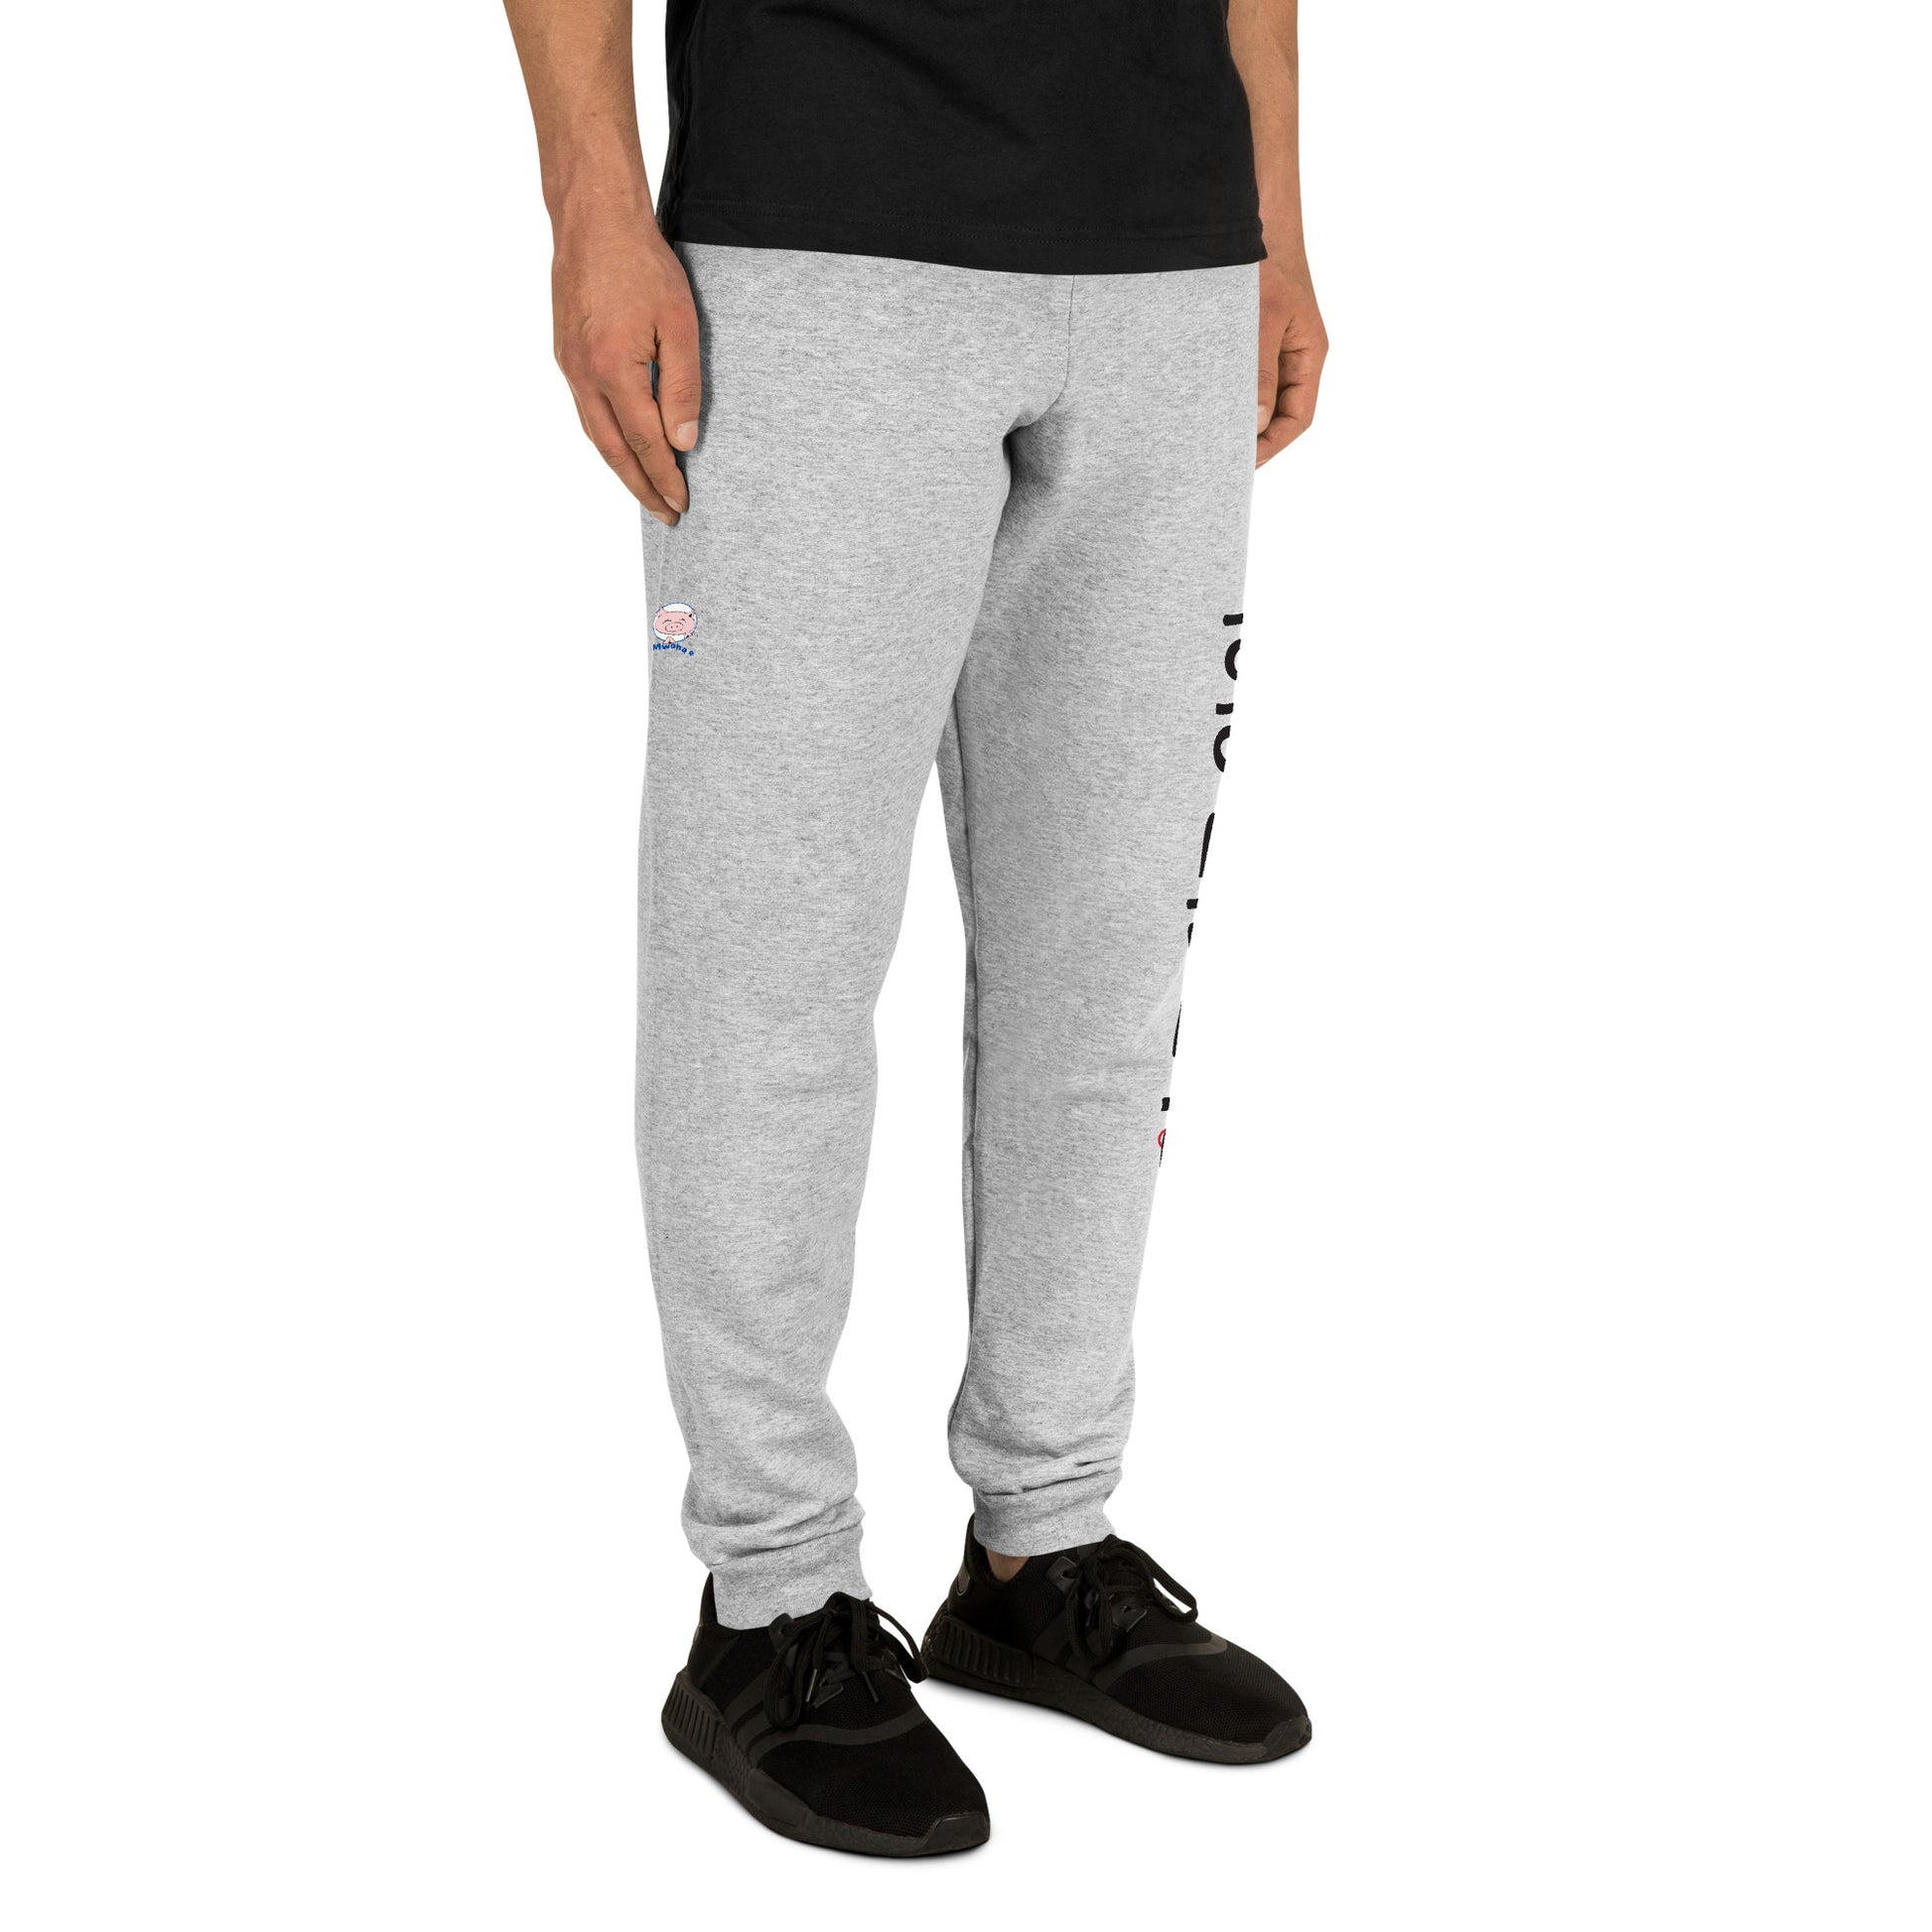 Athletic grey joggers with small Mwohae logo on the right leg